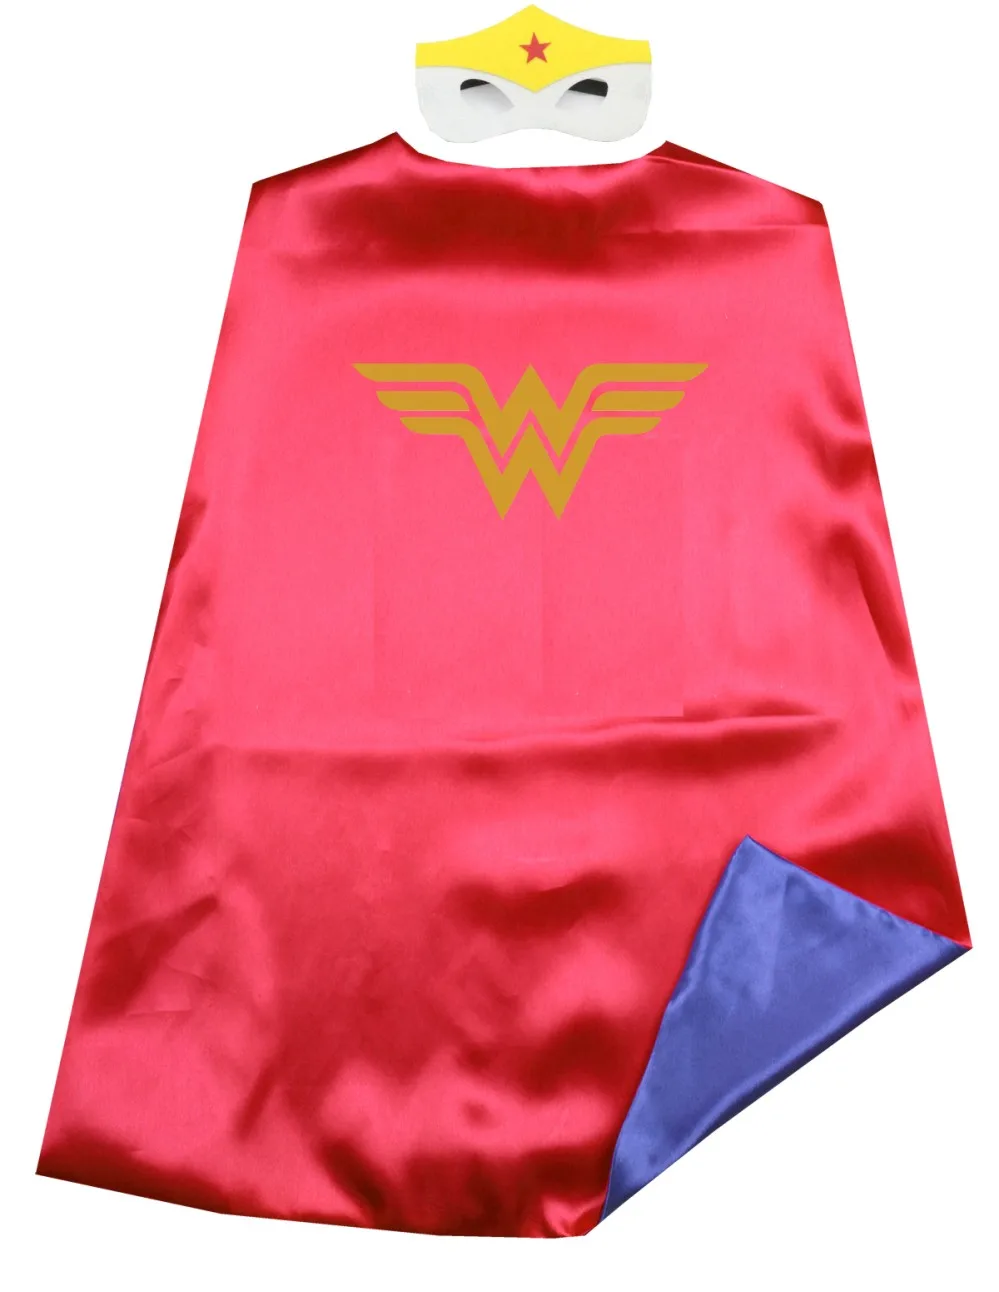 Dress Up Superhero Satin 2layer Justice League Hero Capes masks costume Birthday Party Favor Superhero Capes